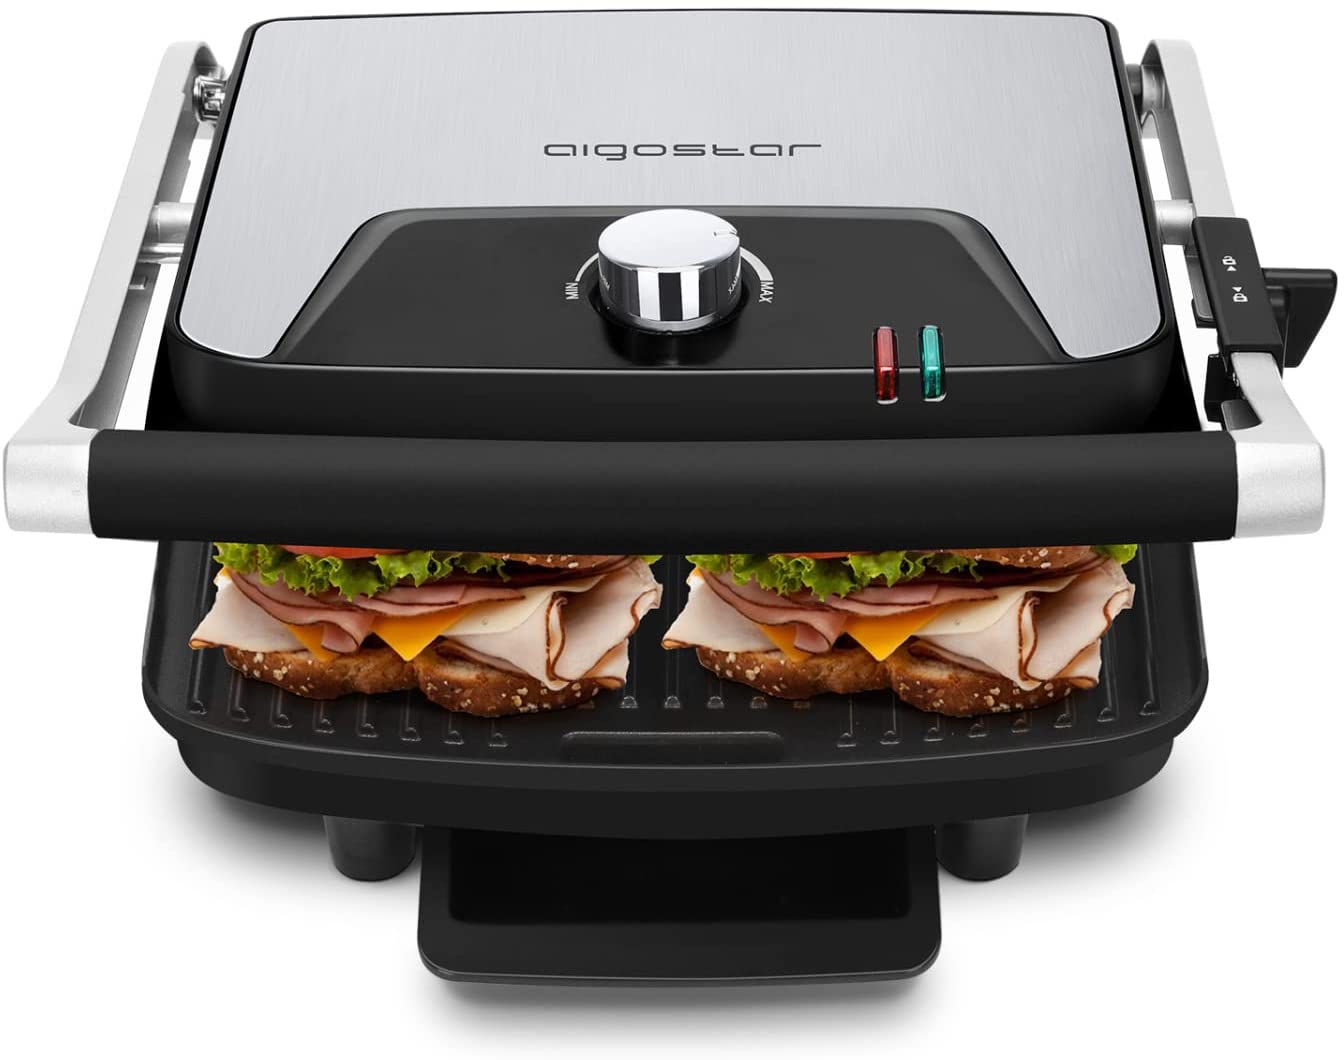 Aigostar Samson 30KLU XXL Contact Grill, Panini Grill, Sandwich Maker, 2000 Watts, Stainless Steel with Non-Stick Coating, Opens 180 Degrees, Temperature Control